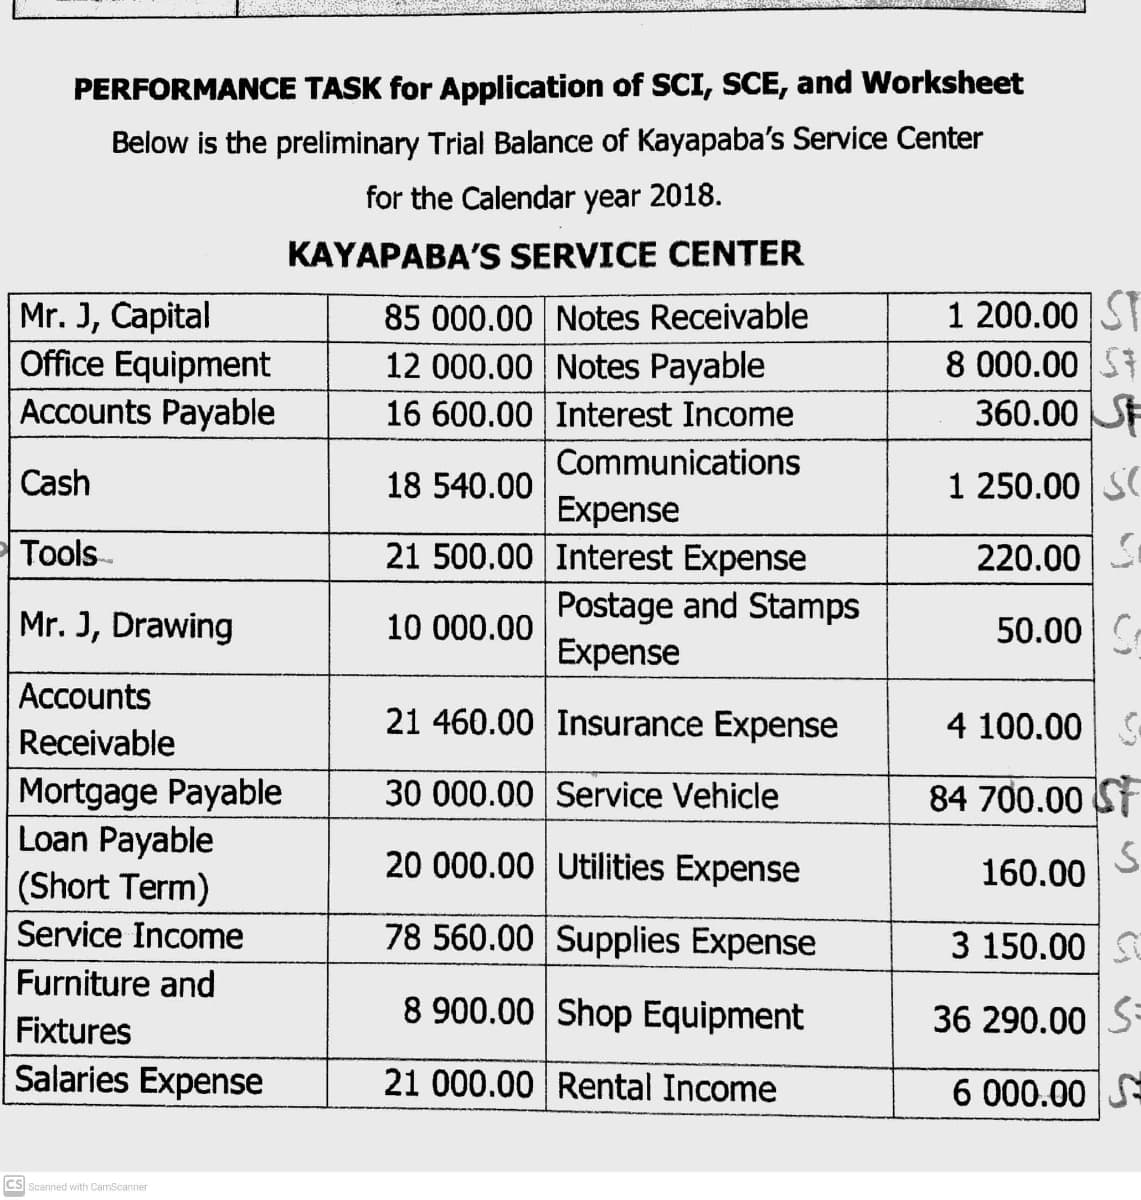 PERFORMANCE TASK for Application of SCI, SCE, and Worksheet
Below is the preliminary Trial Balance of Kayapaba's Service Center
for the Calendar year 2018.
KAYAPABA'S SERVICE CENTER
Mr. J, Capital
Office Equipment
Accounts Payable
85 000.00 Notes Receivable
12 000.00 Notes Payable
16 600.00 Interest Income
1 200.00 ST
8 000.00 S
360.00 SF
Communic
ons
Cash
18 540.00
1 250.00 S
Expense
21 500.00 Interest Expense
Tools
220.00
Postage and Stamps
Expense
Mr. J, Drawing
10 000.00
50.00 S-
Accounts
21 460.00 Insurance Expense
4 100.00 S
Receivable
Mortgage Payable
Loan Payable
(Short Term)
30 000.00 Service Vehicle
84 700.00 SF
20 000.00 Utilities Expense
160.00
Service Income
78 560.00 Supplies Expense
3 150.00 S
Furniture and
8 900.00 Shop Equipment
36 290.00 S
Fixtures
Salaries Expense
21 000.00 Rental Income
6 000.00 S
CS Scanned with CamScanner
